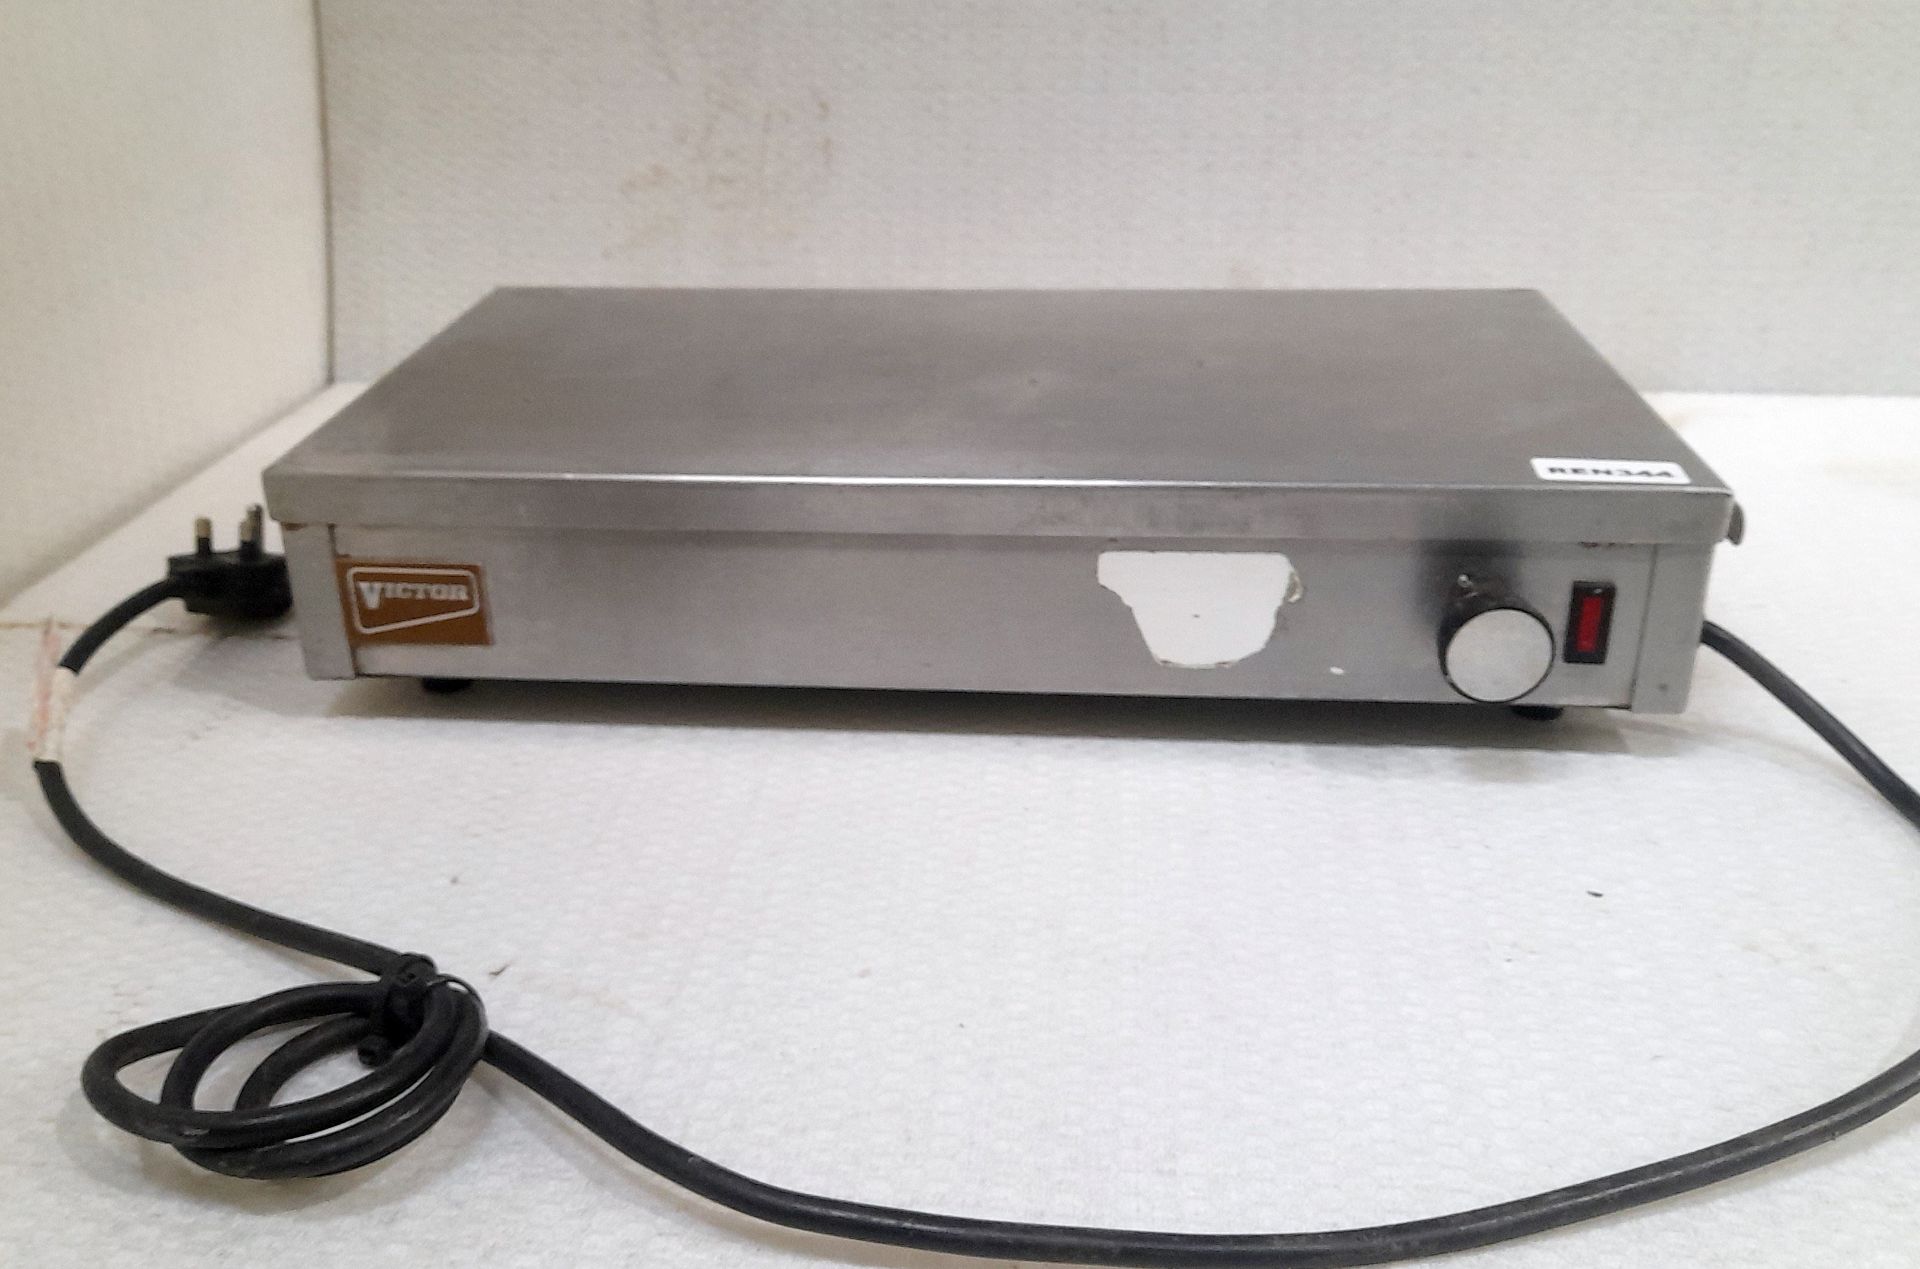 1 x Victor Hot Plate - Food Warming Hot Plate - 240v